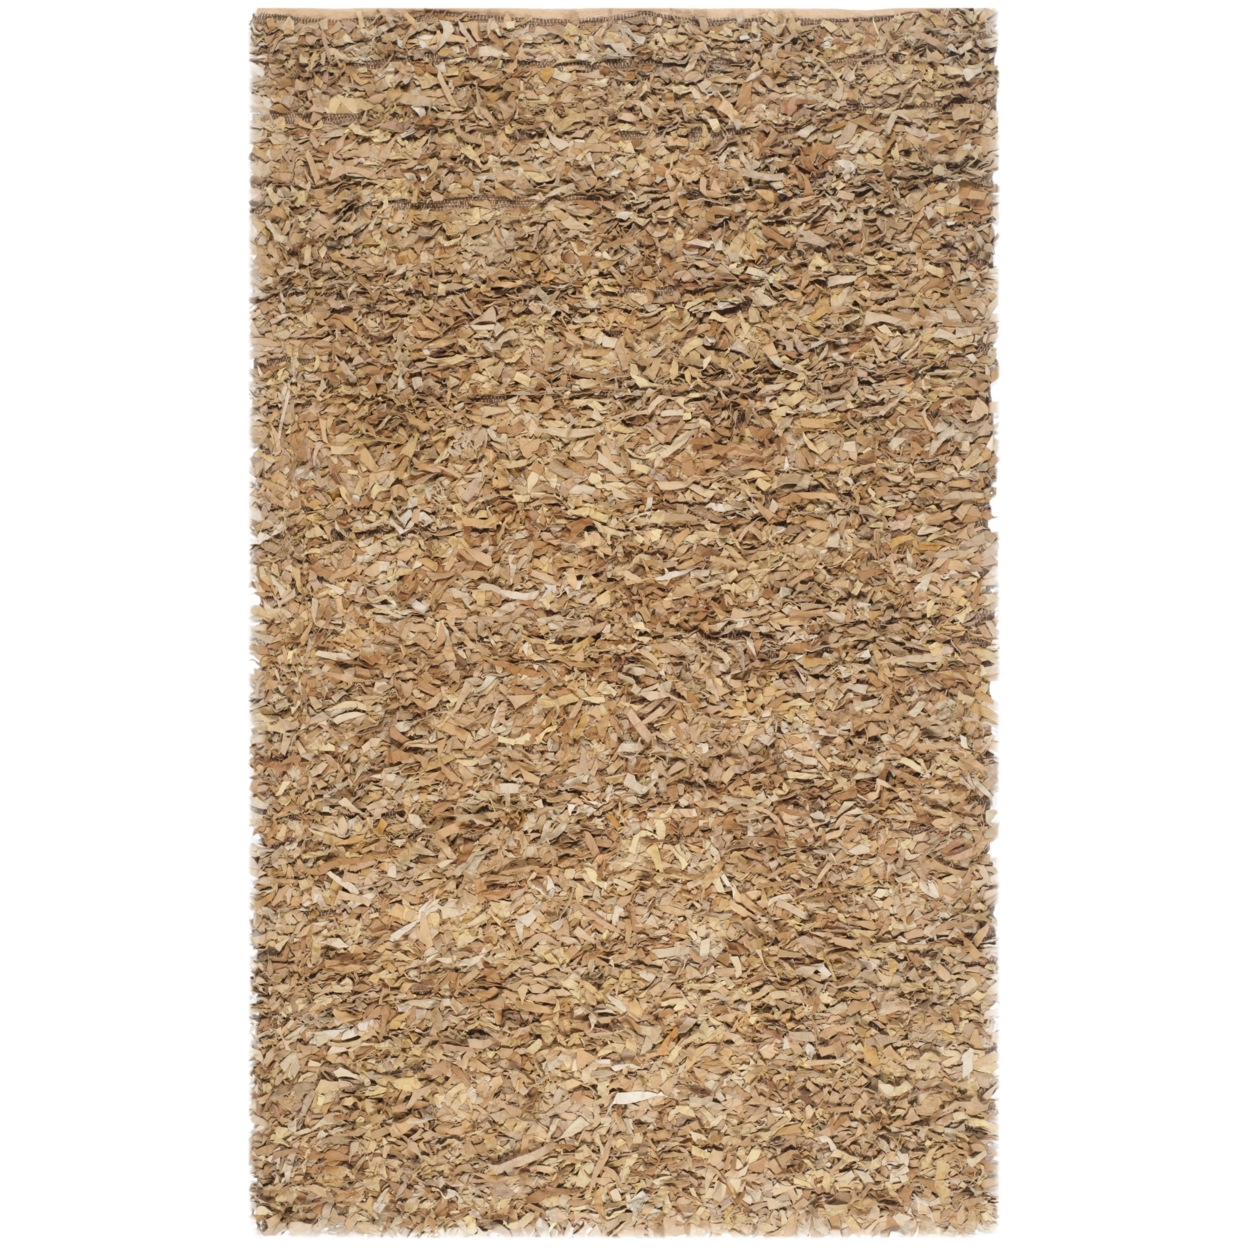 SAFAVIEH Leather Shag LSG511G Hand-knotted Light Gold Rug - 8' X 10'